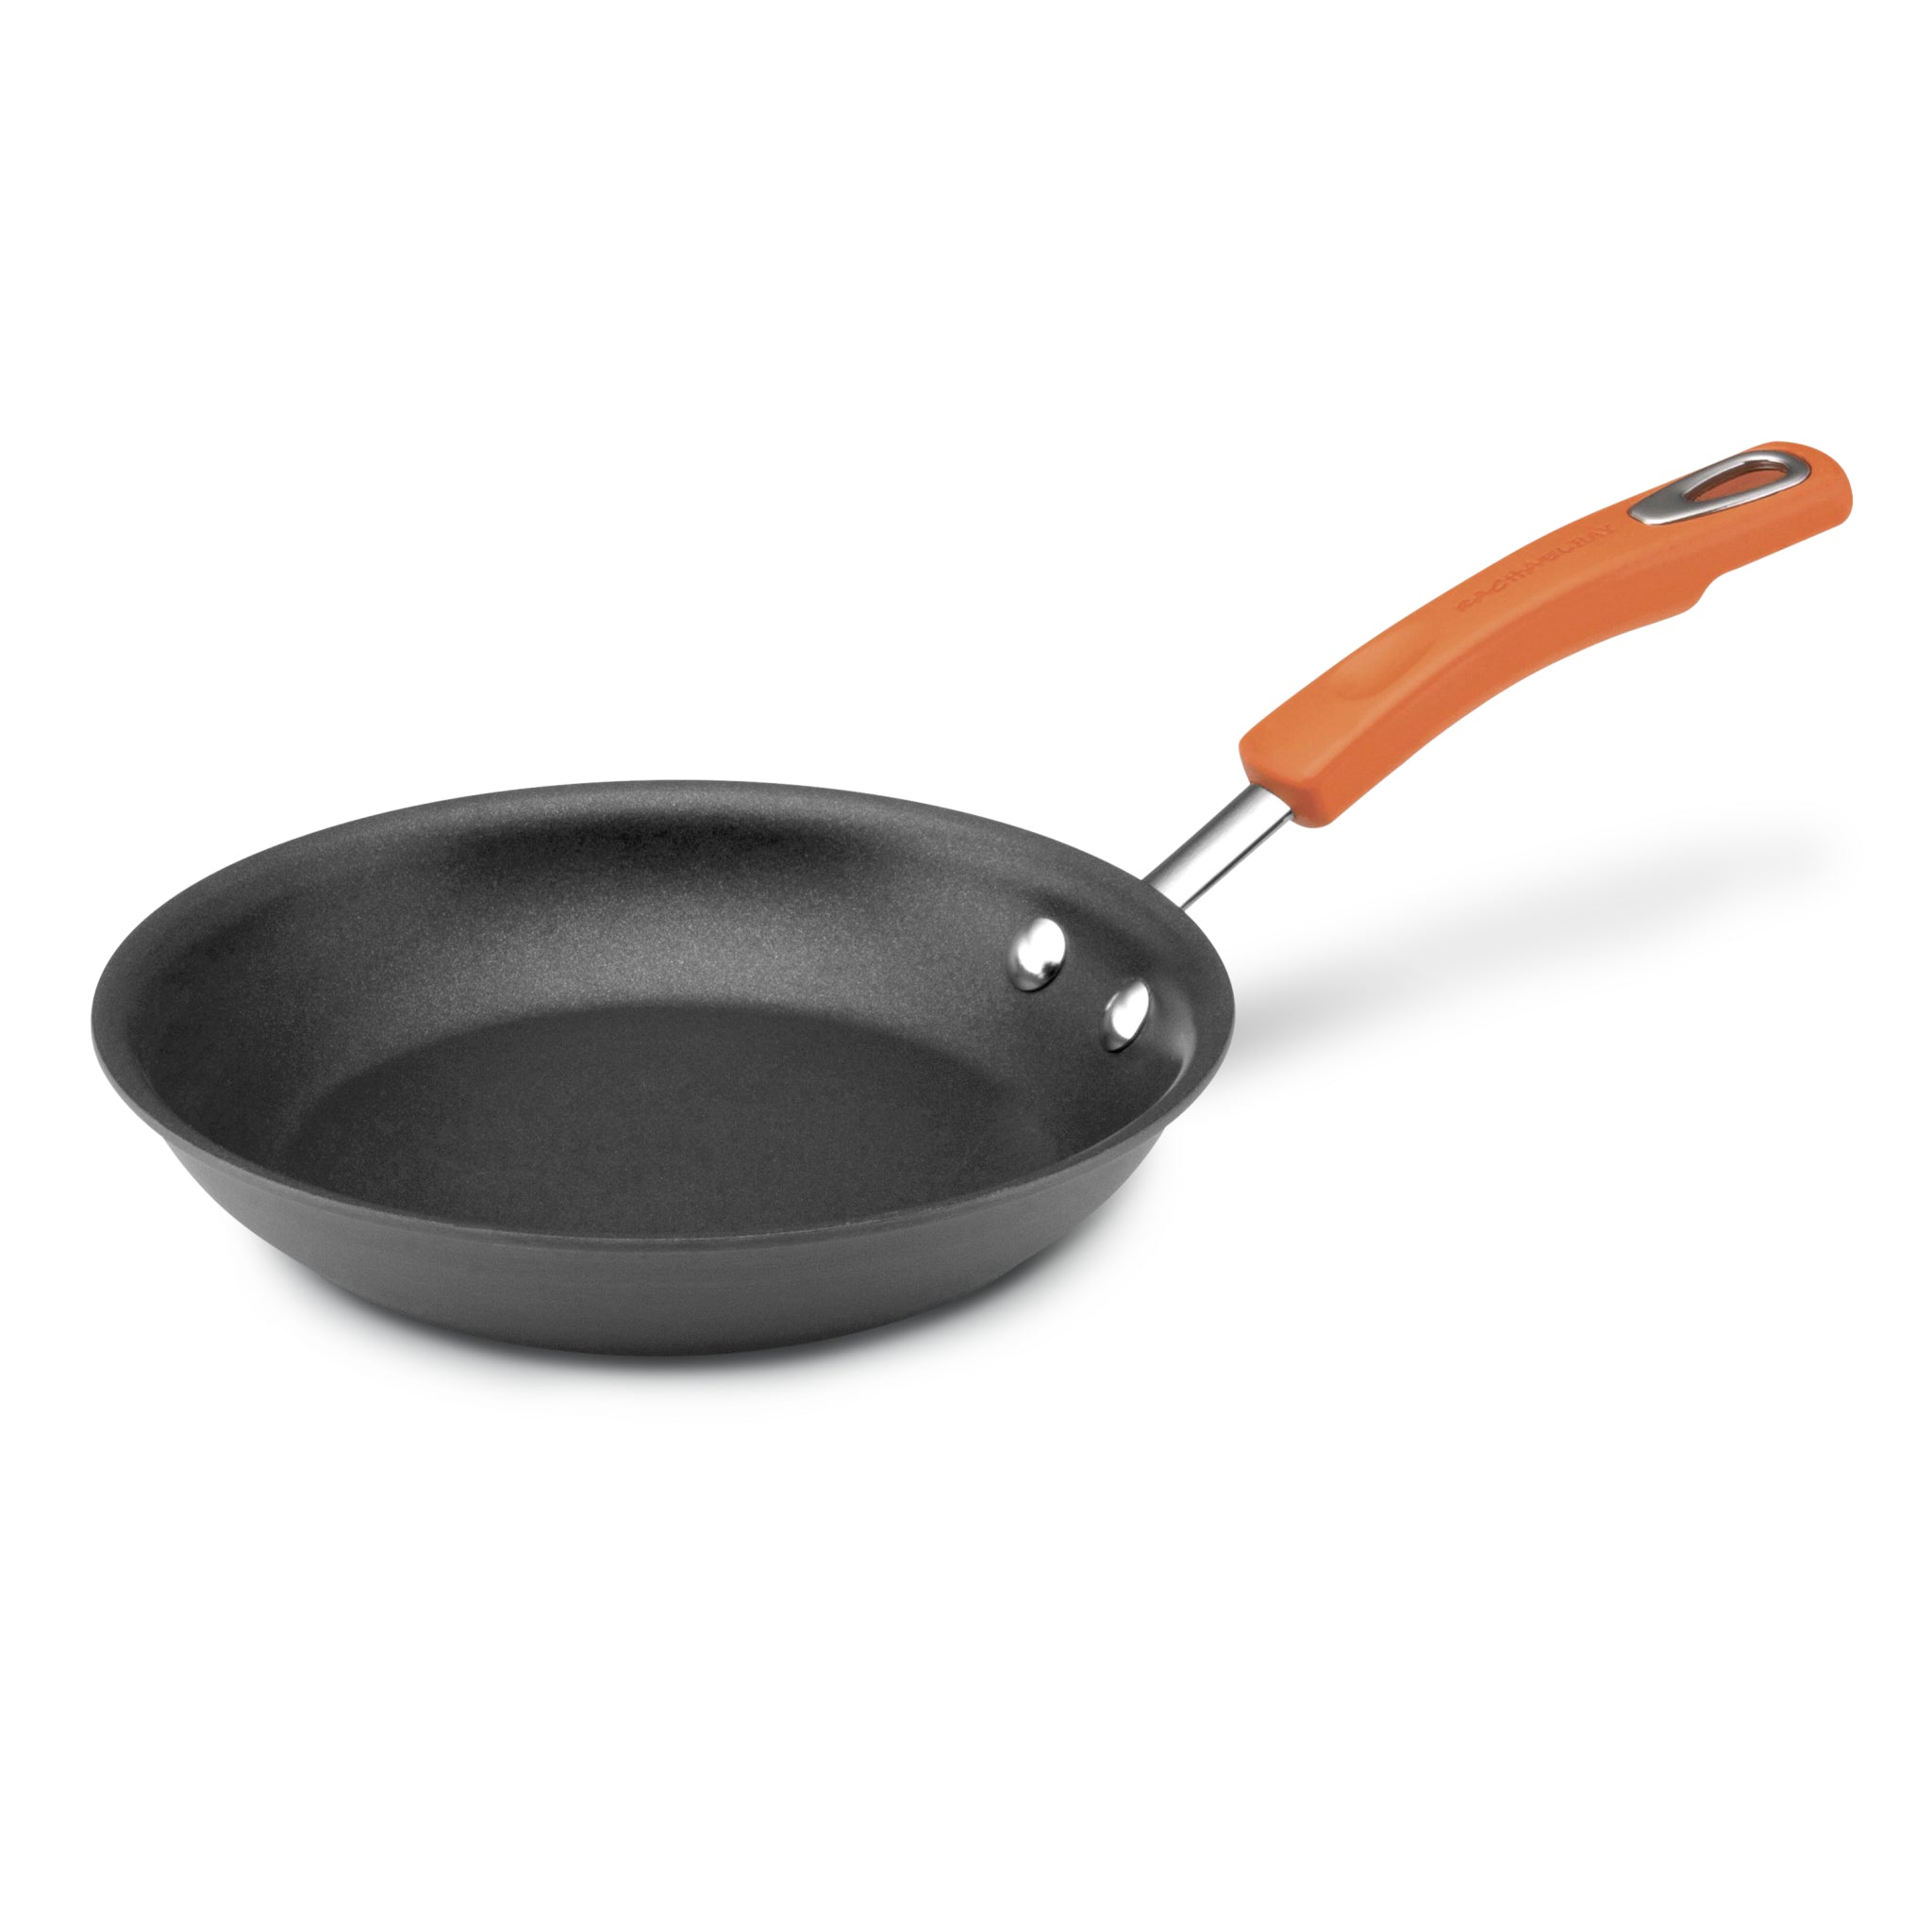 Rachael Ray 14 Hard Anodized Nonstick Frying Pan with Helper Handle Gray